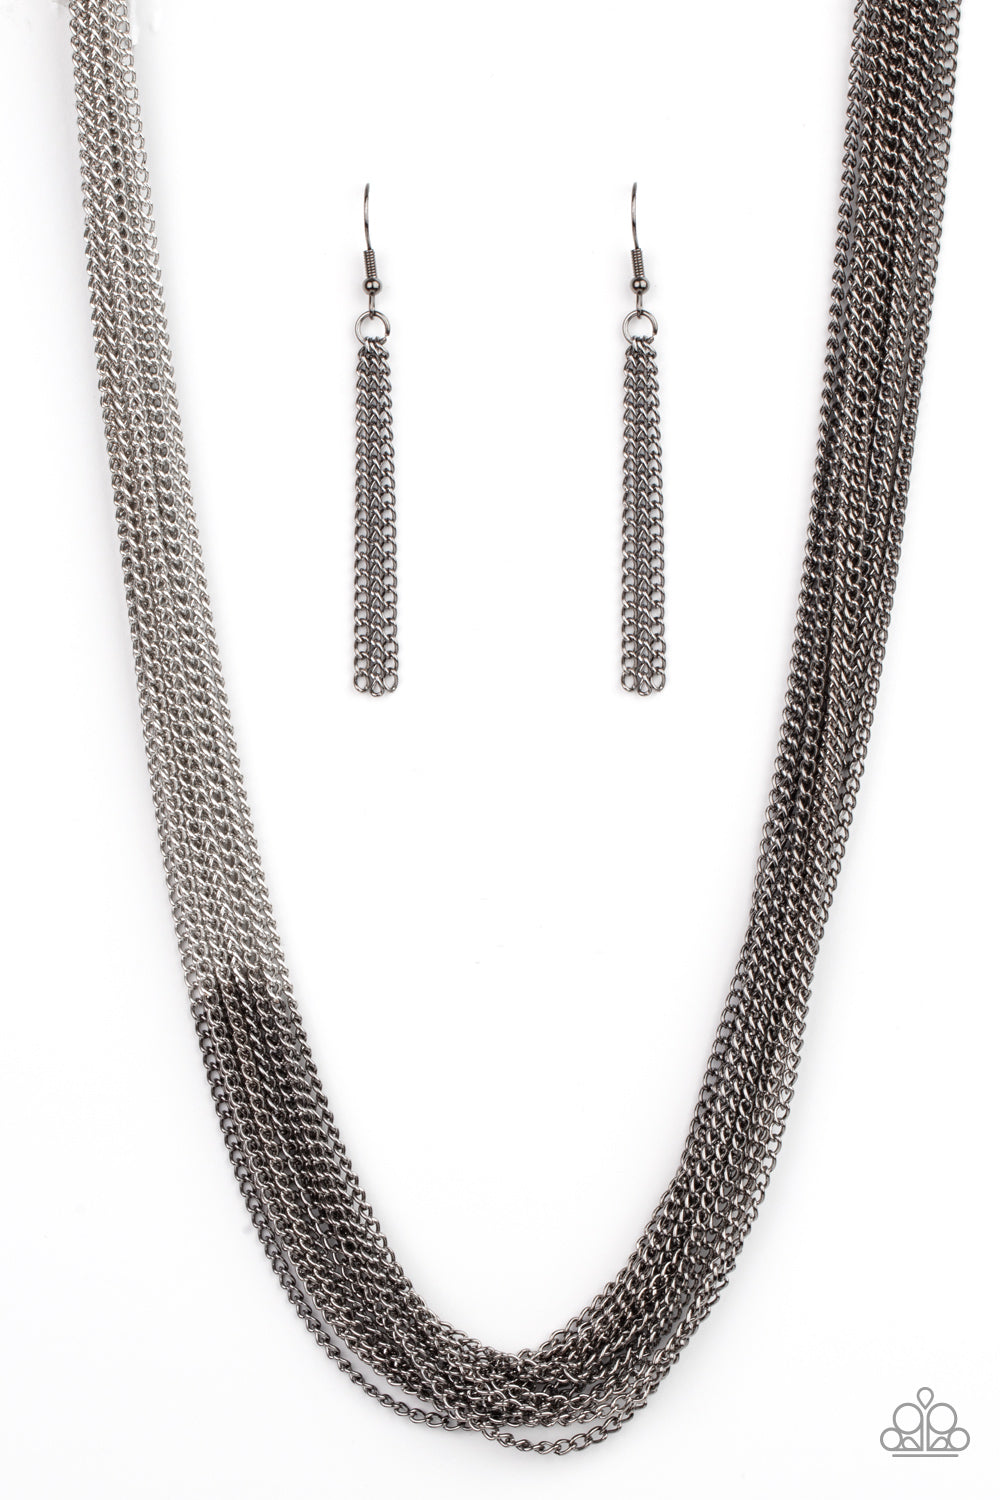 Sections of glistening gunmetal chains collide with shimmery silver chains below the collar, linking into dramatic layers for an edgy effect. Features an adjustable clasp closure.